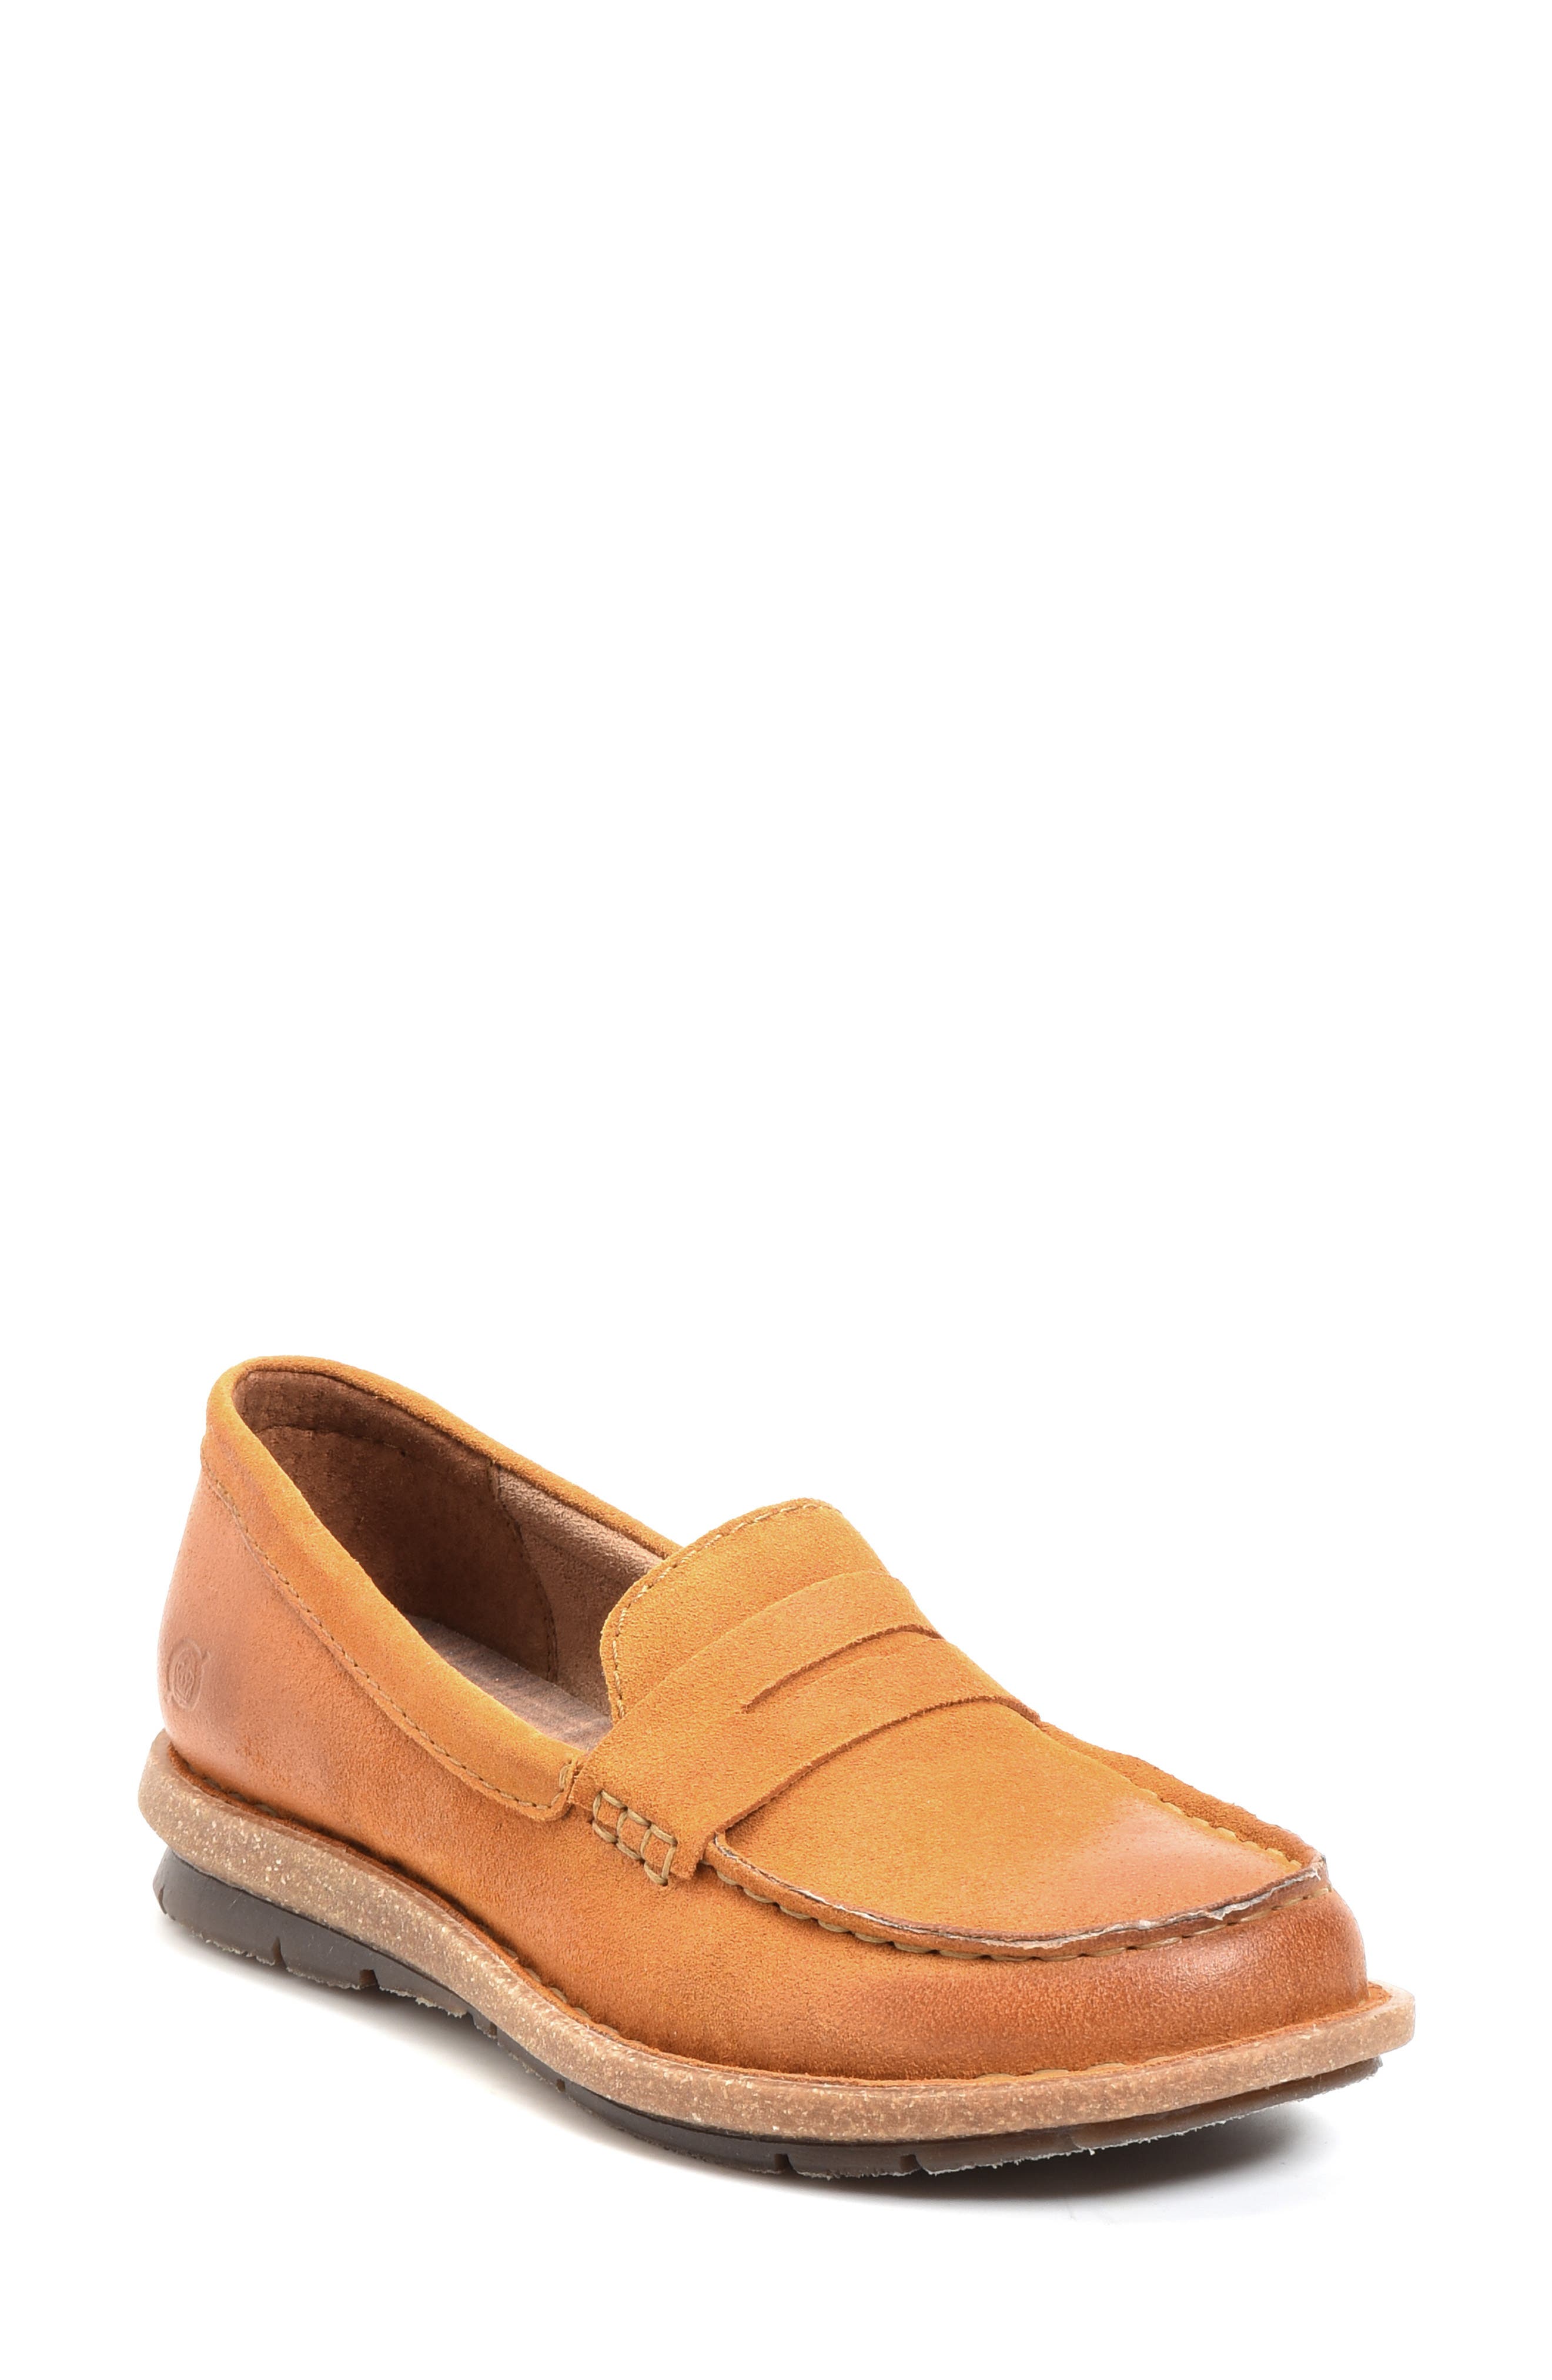 arch support loafers